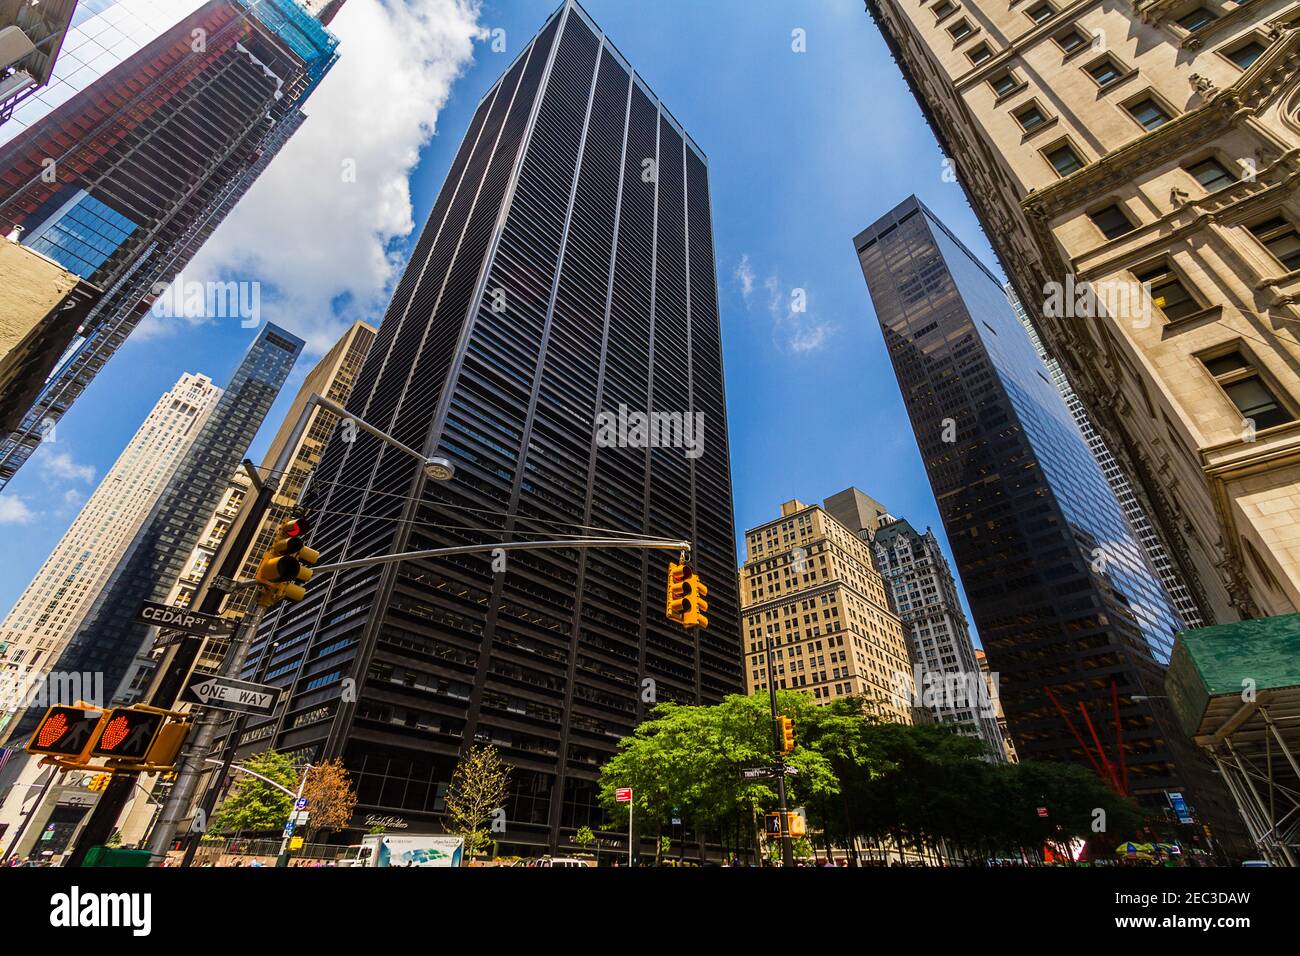 Street view of some buildings and skyscrapers in the Financial District in New York with Cedar Street sign Stock Photo